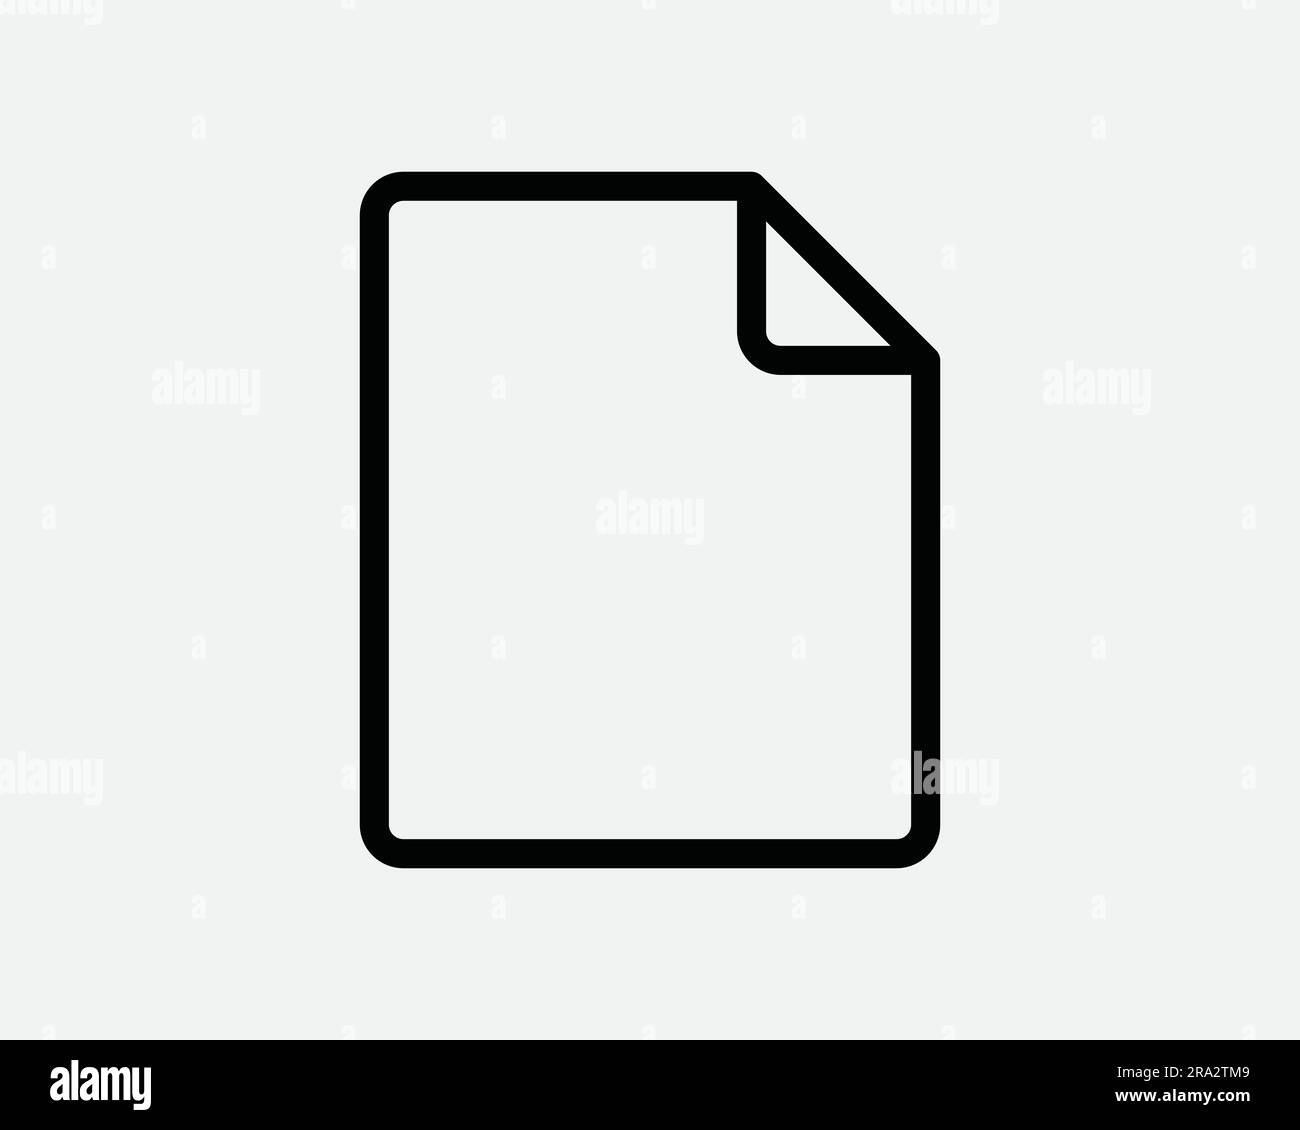 File Line Icon. Doc Document Page Paper Sheet Archive Form Text Word. Empty Blank Black White Graphic Clipart Artwork Outline Symbol Sign Vector EPS Stock Vector